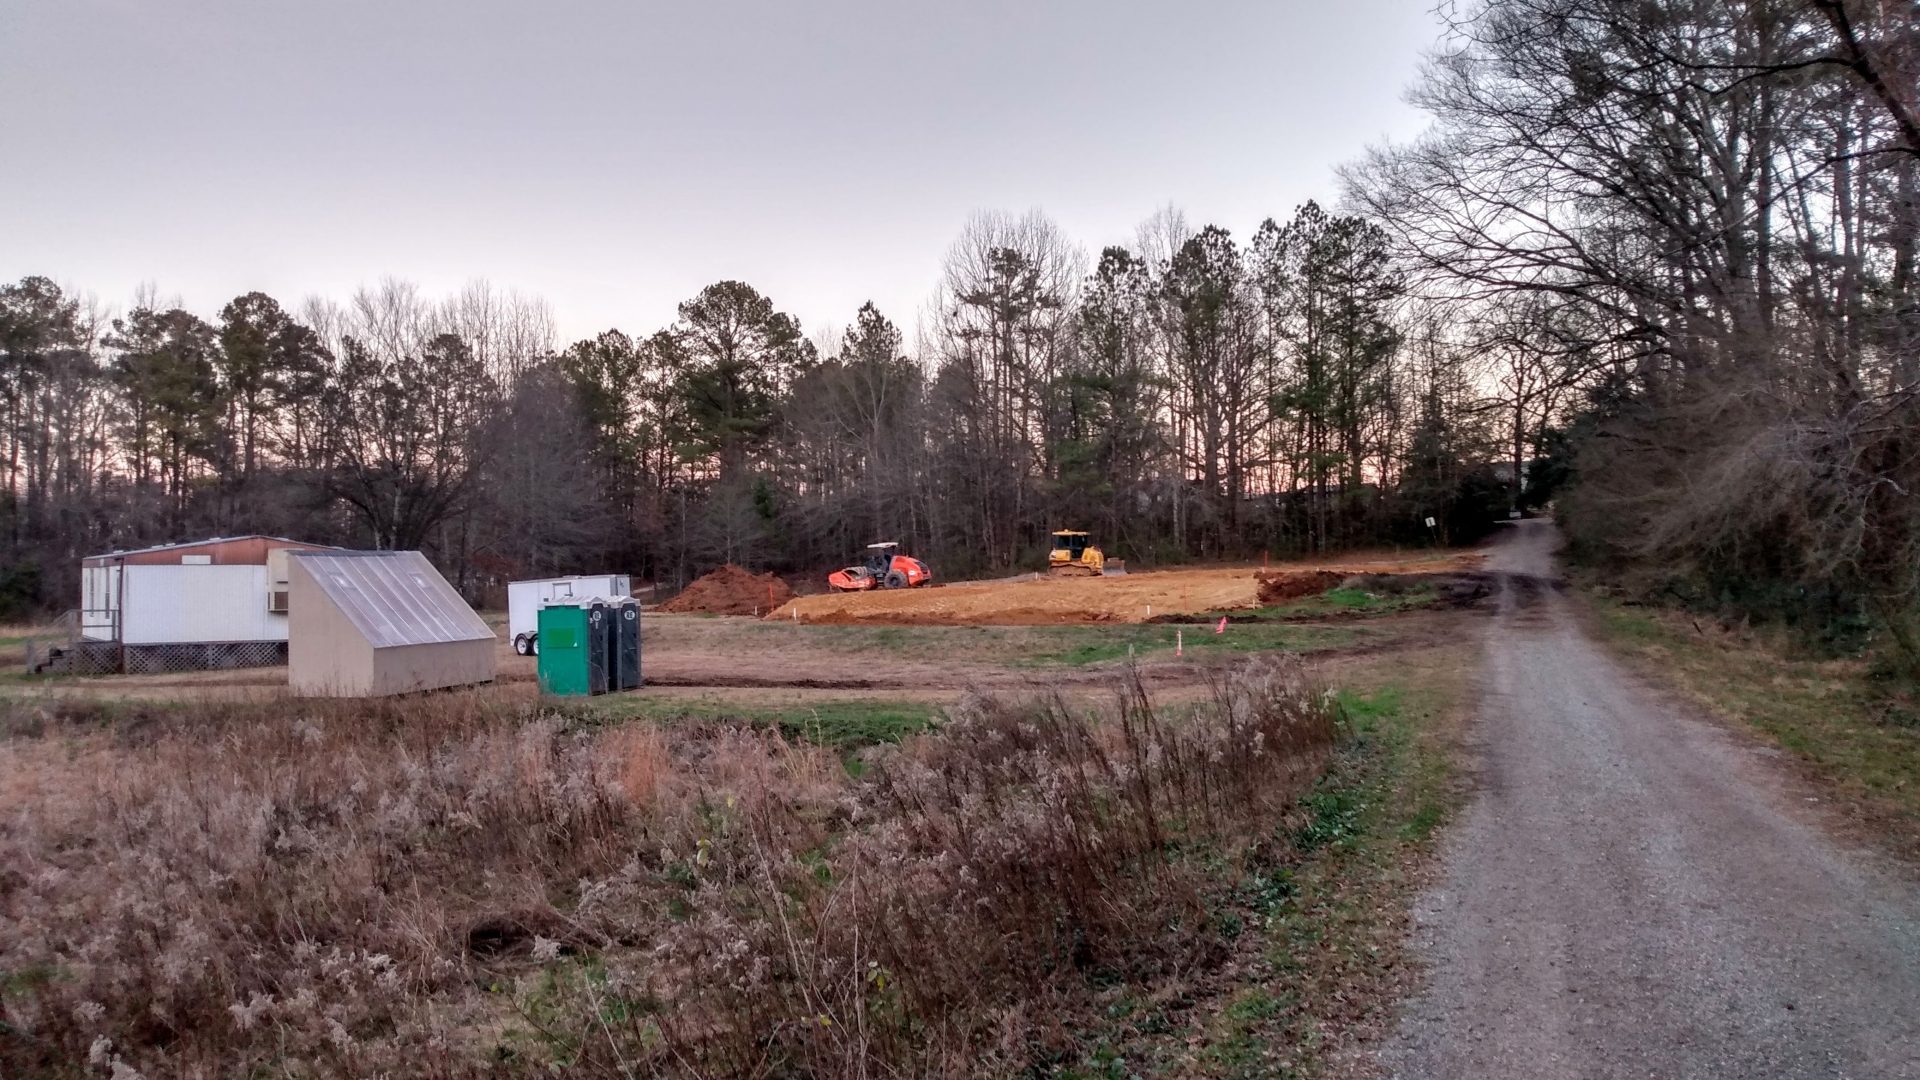 Field in foreground with classroom trailer, solar kiln, and construction site in background.